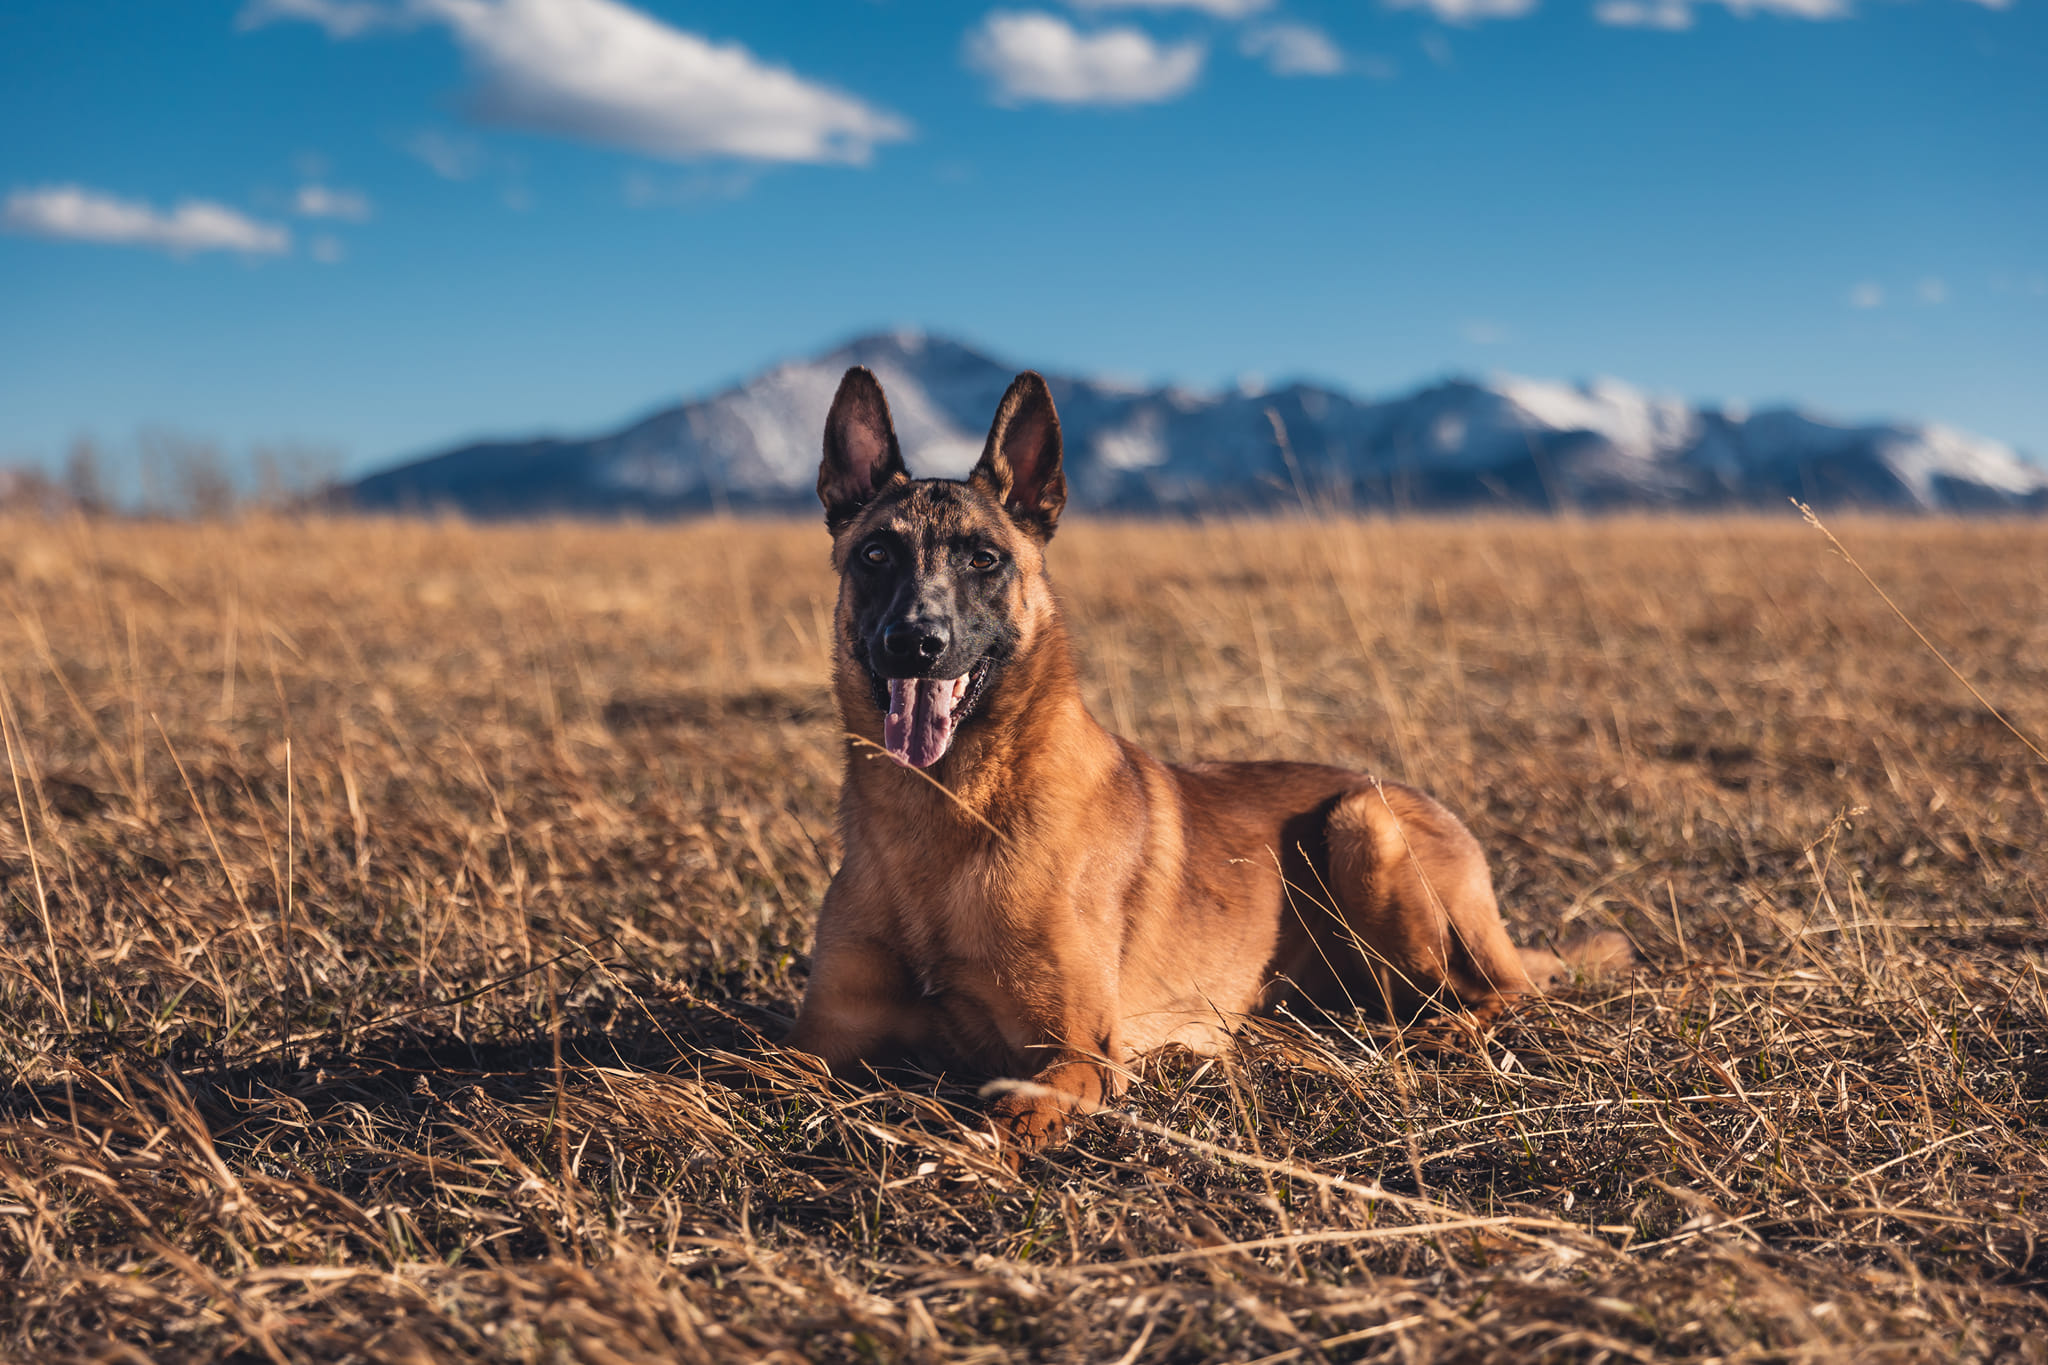 Malinois service dog poses in down position in front of pikes peak